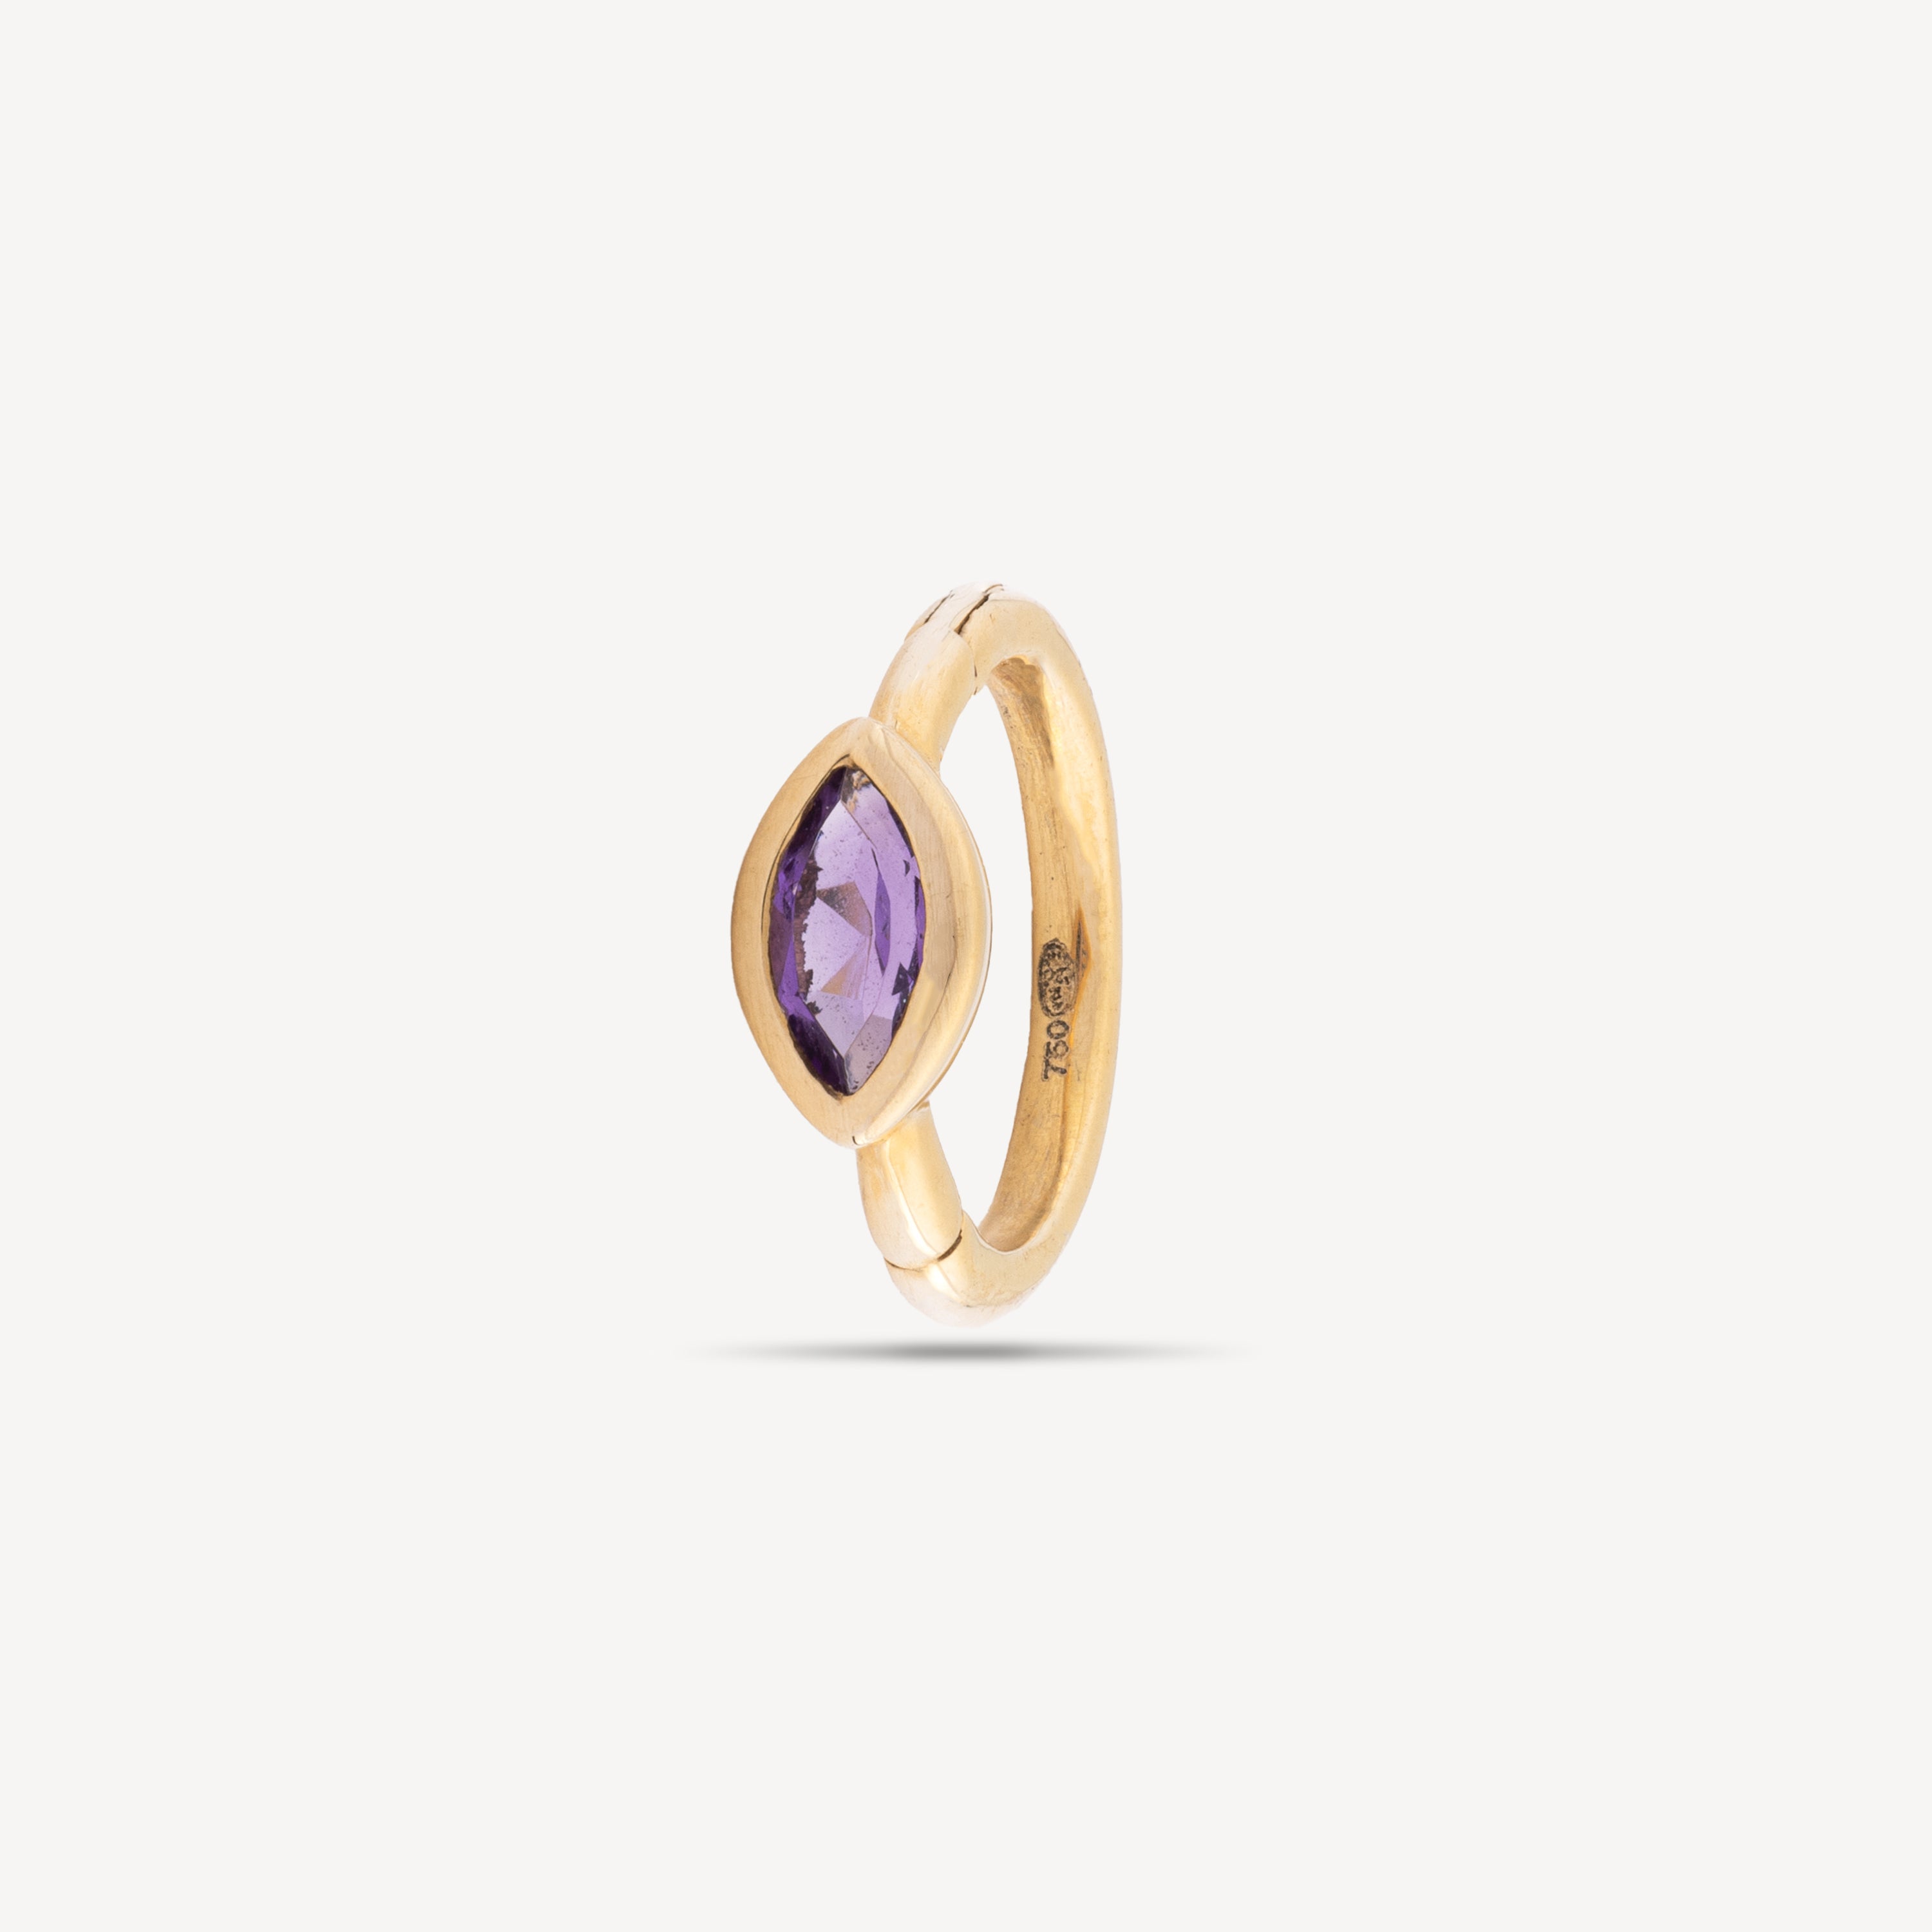 Creole 6.5mm or jaune amethyste marquise 3x2mm